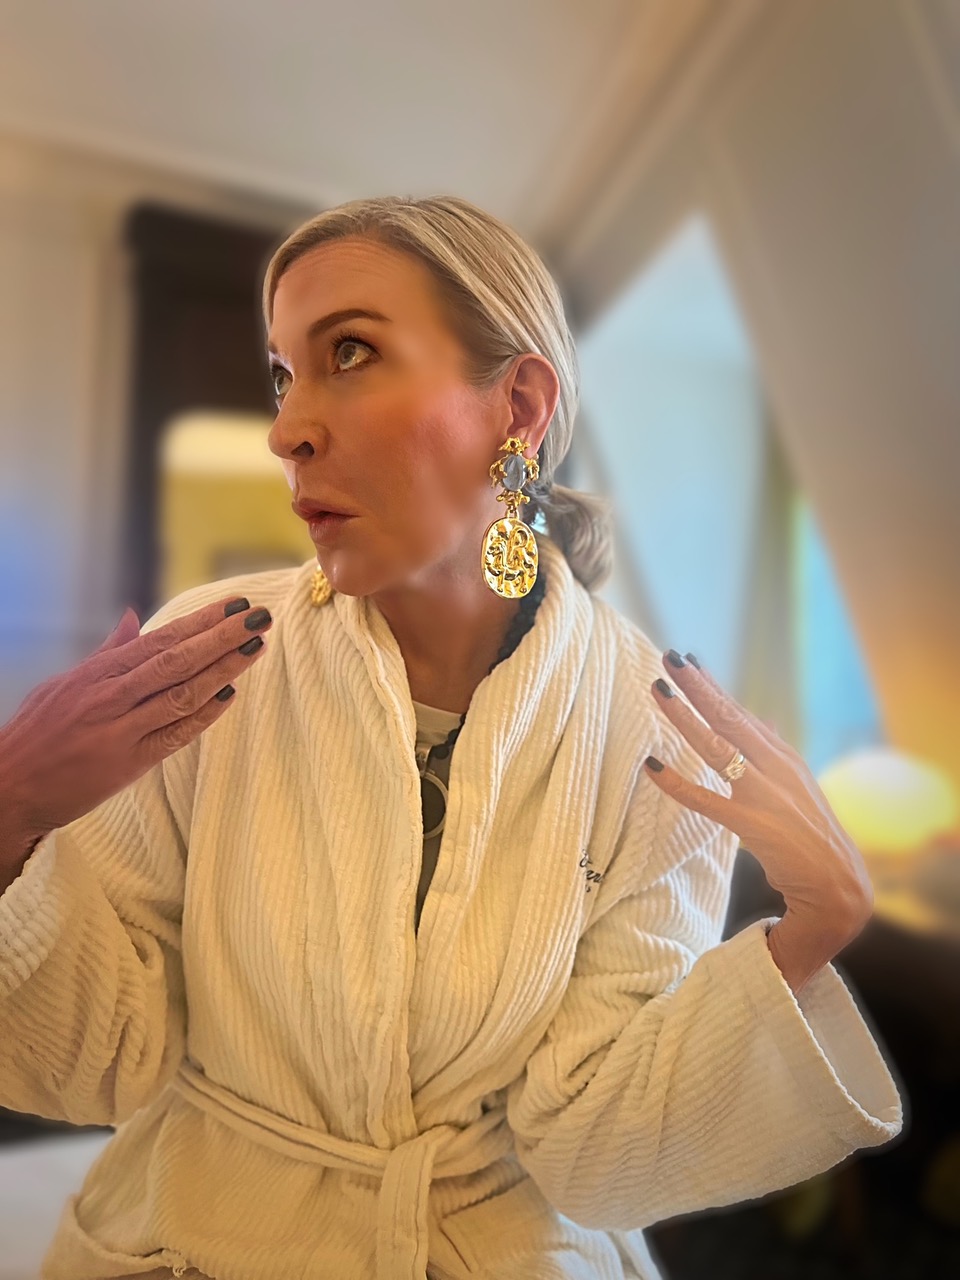 Lifestyle influencer, Jamie Lewinger of More Than turquoise wearing Gavilane earrings in Paris France 